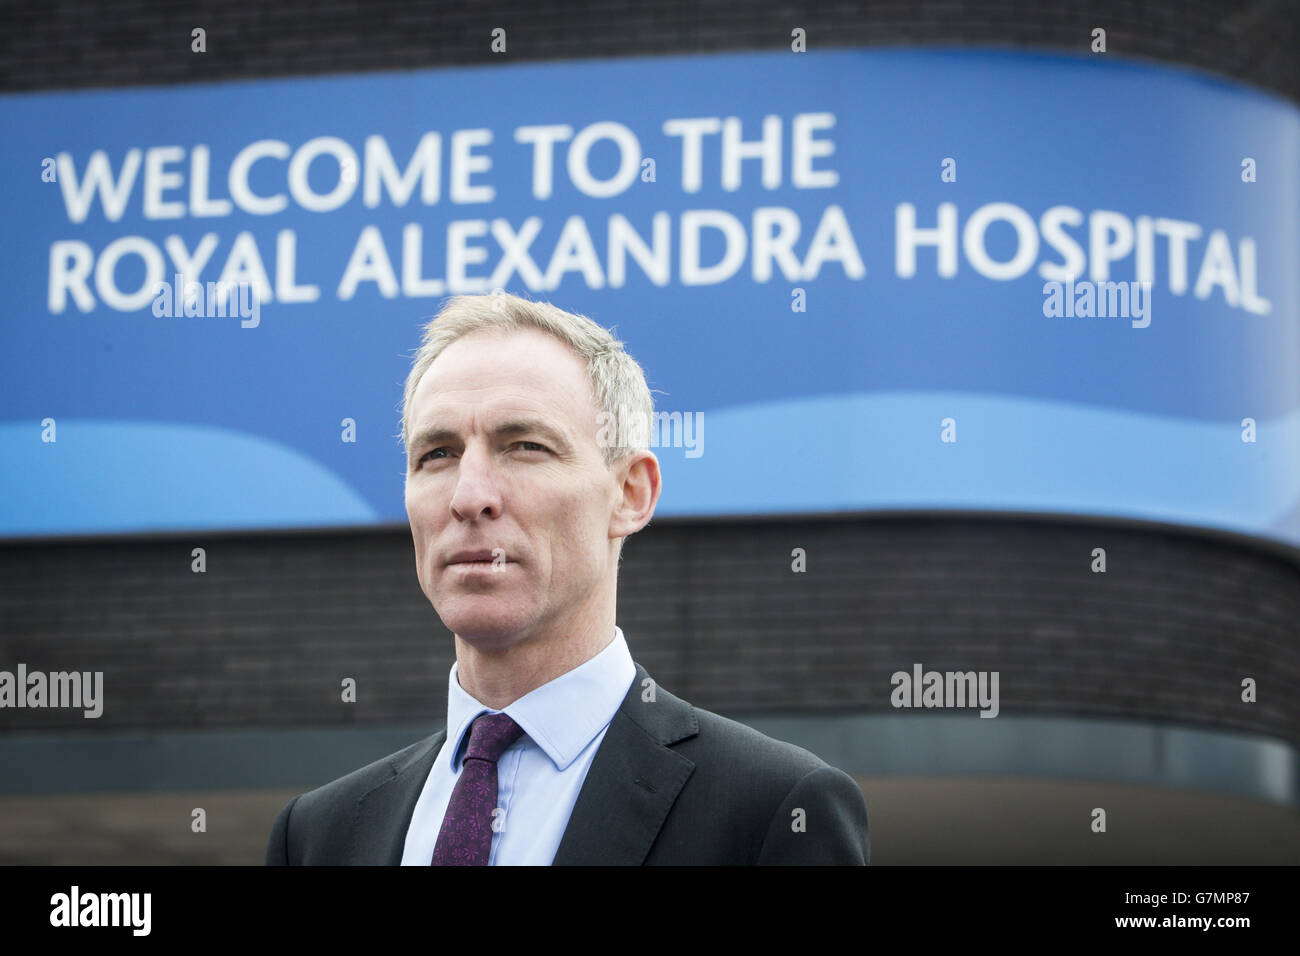 Scottish Labour leader Jim Murphy during a visit to the Royal Alexandra Hospital in Paisley, Scotland, as Labour launches a fresh attack on the Scottish Government over its management of the NHS. Stock Photo